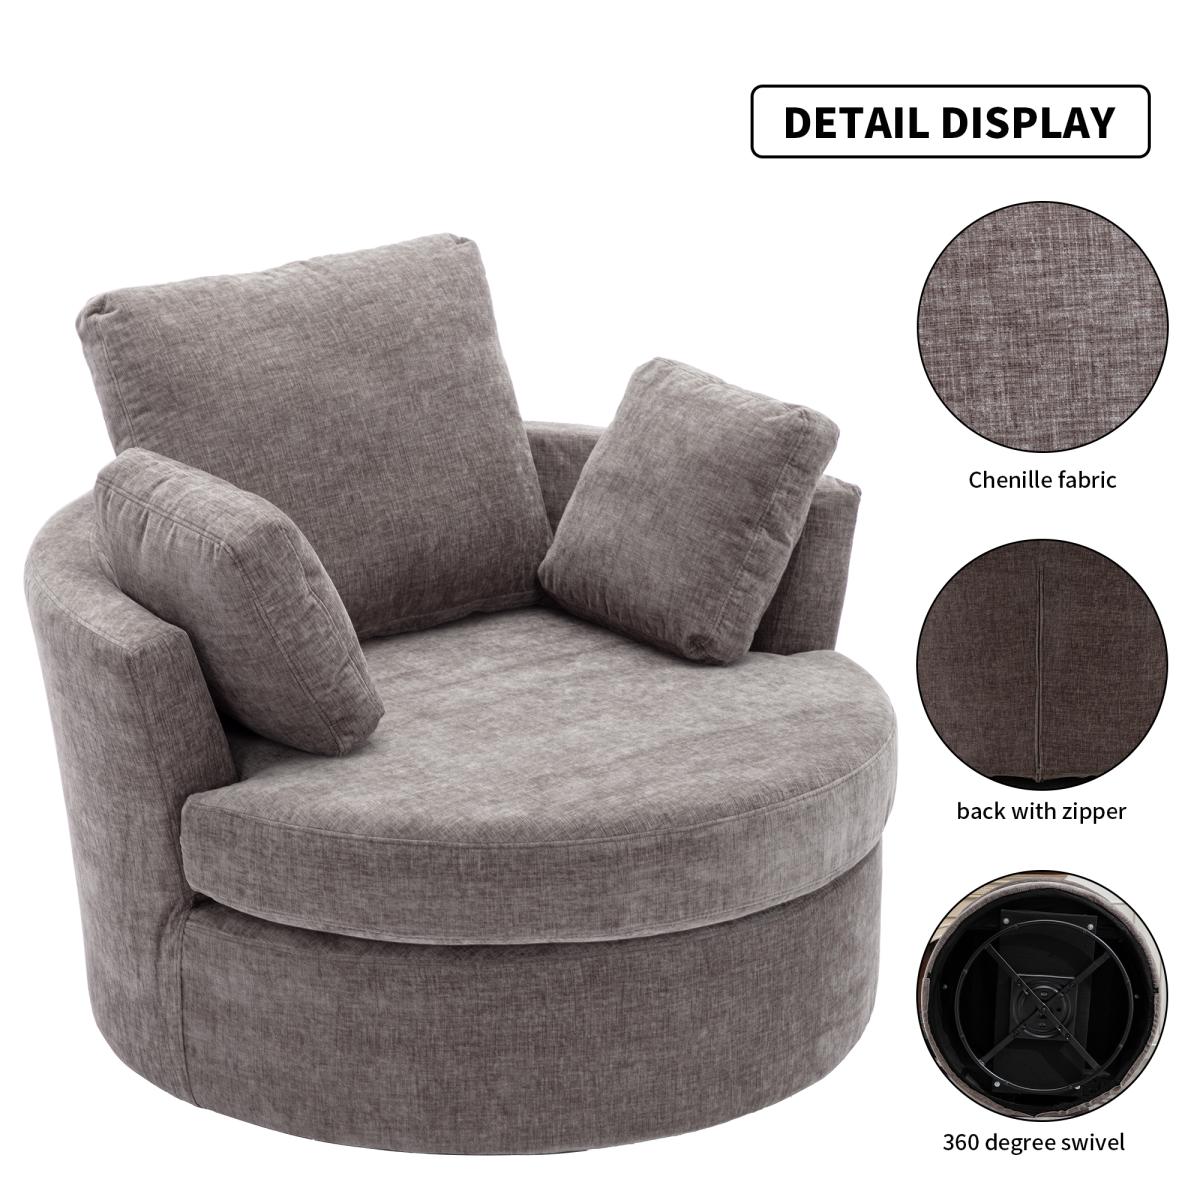 Oversize Round Swivel Chair Cozy Club 360 degrees Swivel Sofa with 3 Pillows Chenille Fabric for Living Room Lounge Hotel 40.2d X 42.1w X 34.3h Inch